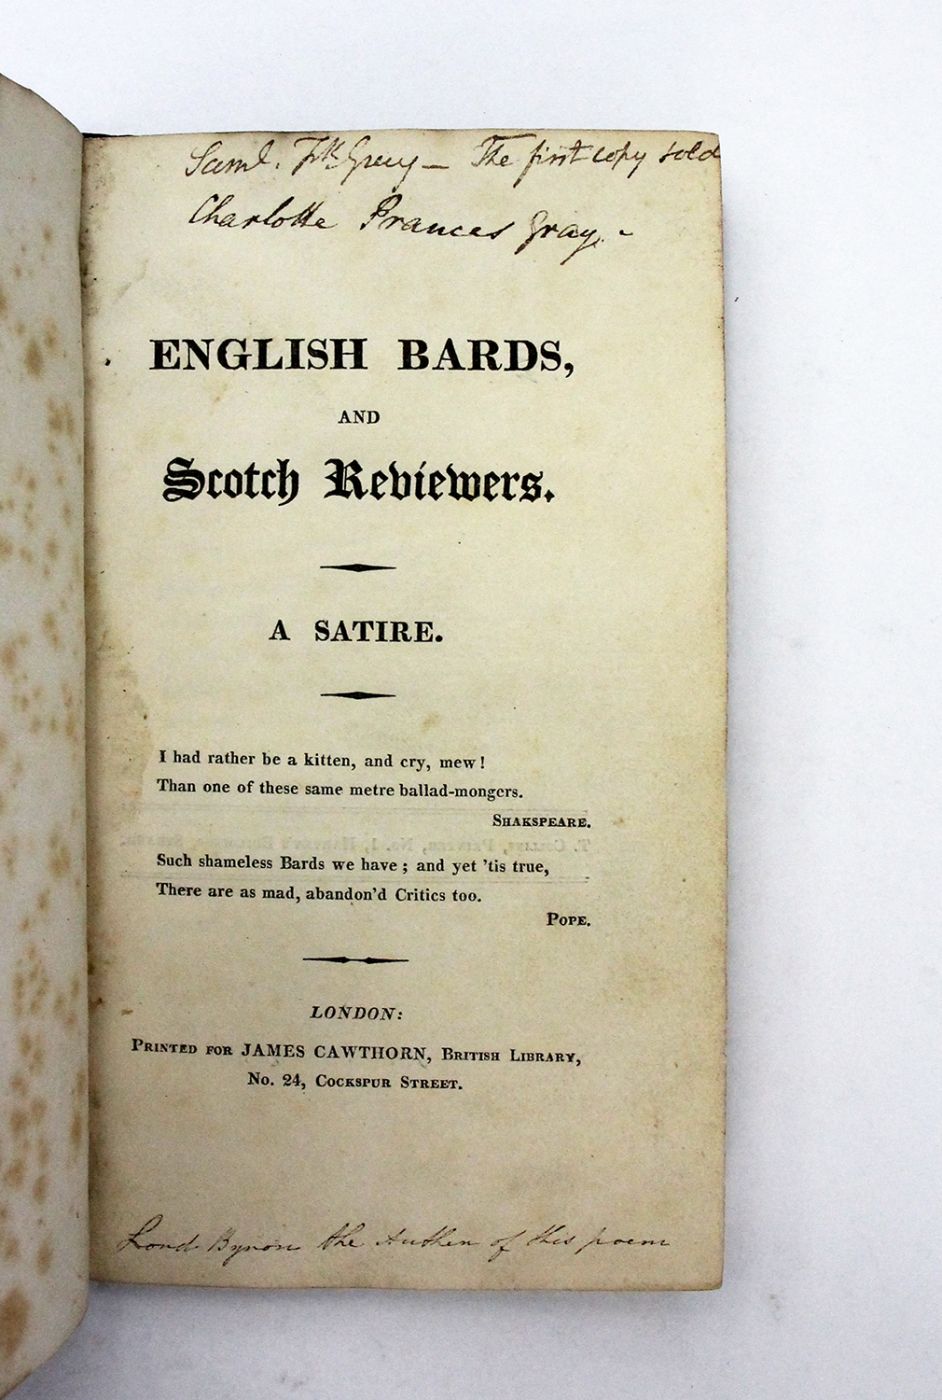 ENGLISH BARDS, AND SCOTCH REVIEWERS. A SATIRE. ['THE FIRST COPY SOLD']. -  image 1